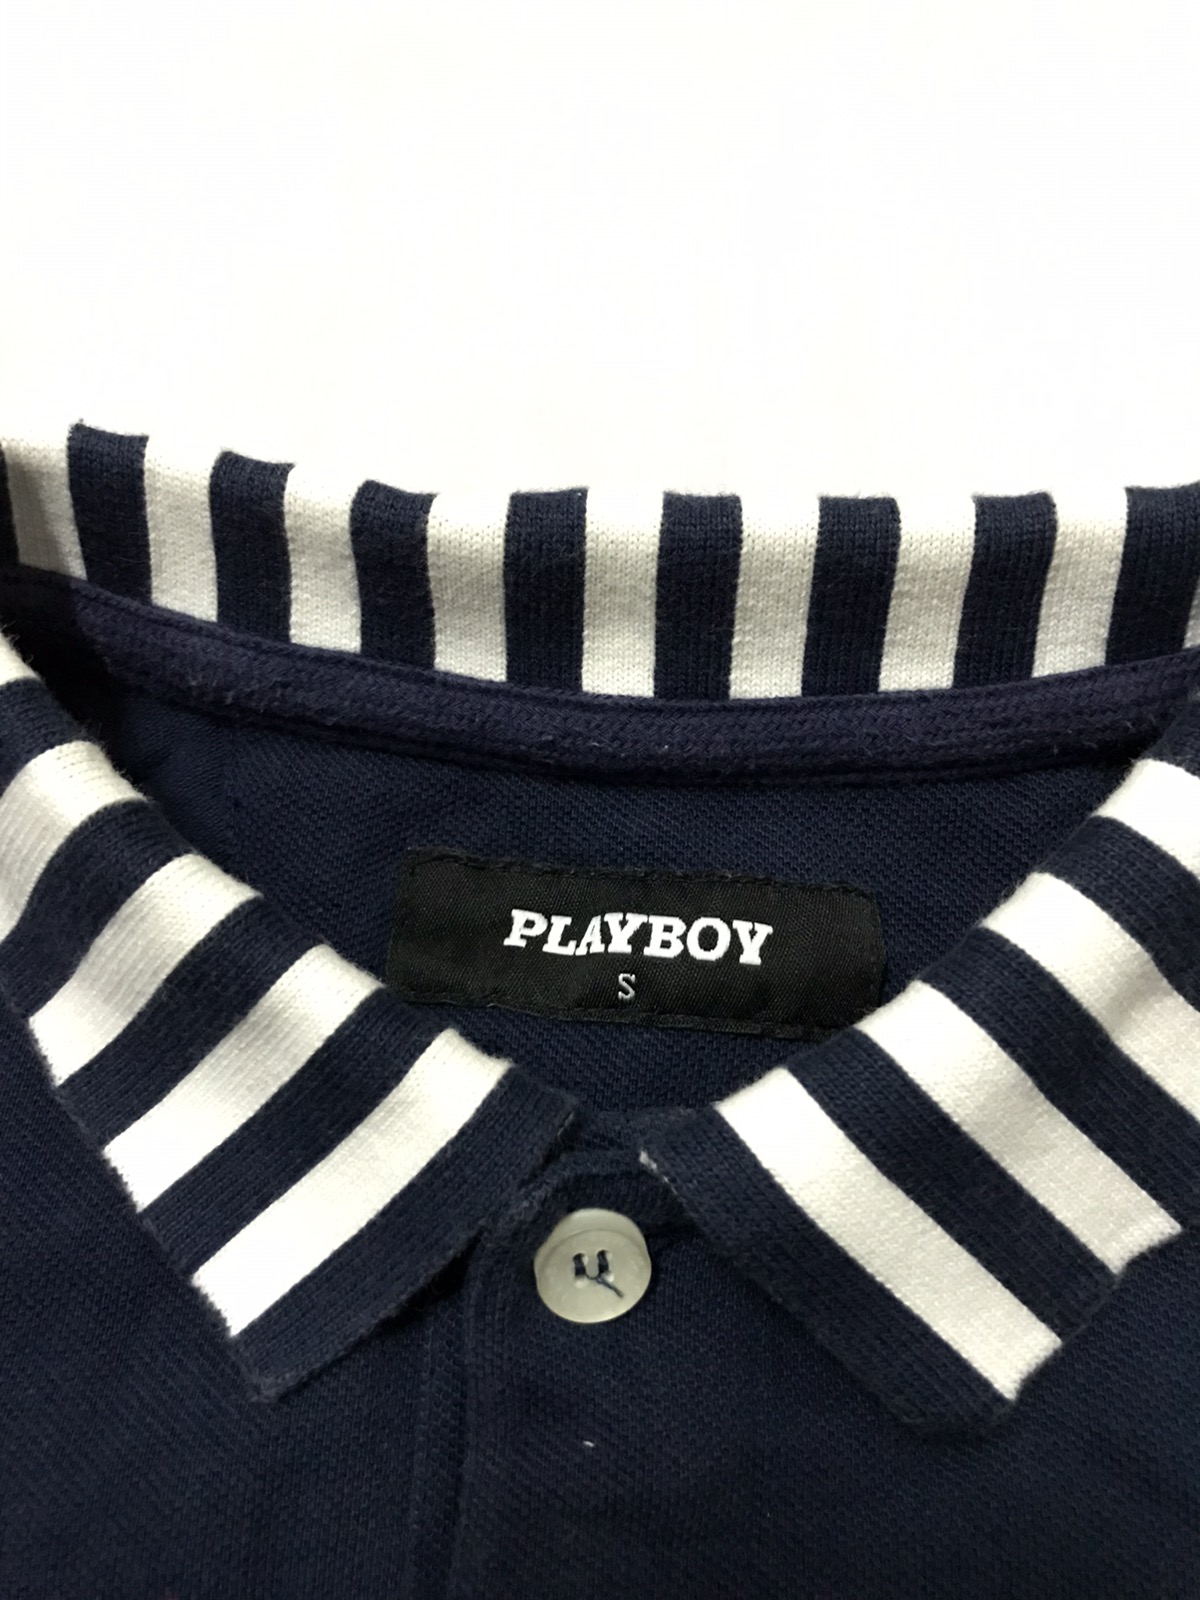 Playboy - Playboy polos for women’s - 3